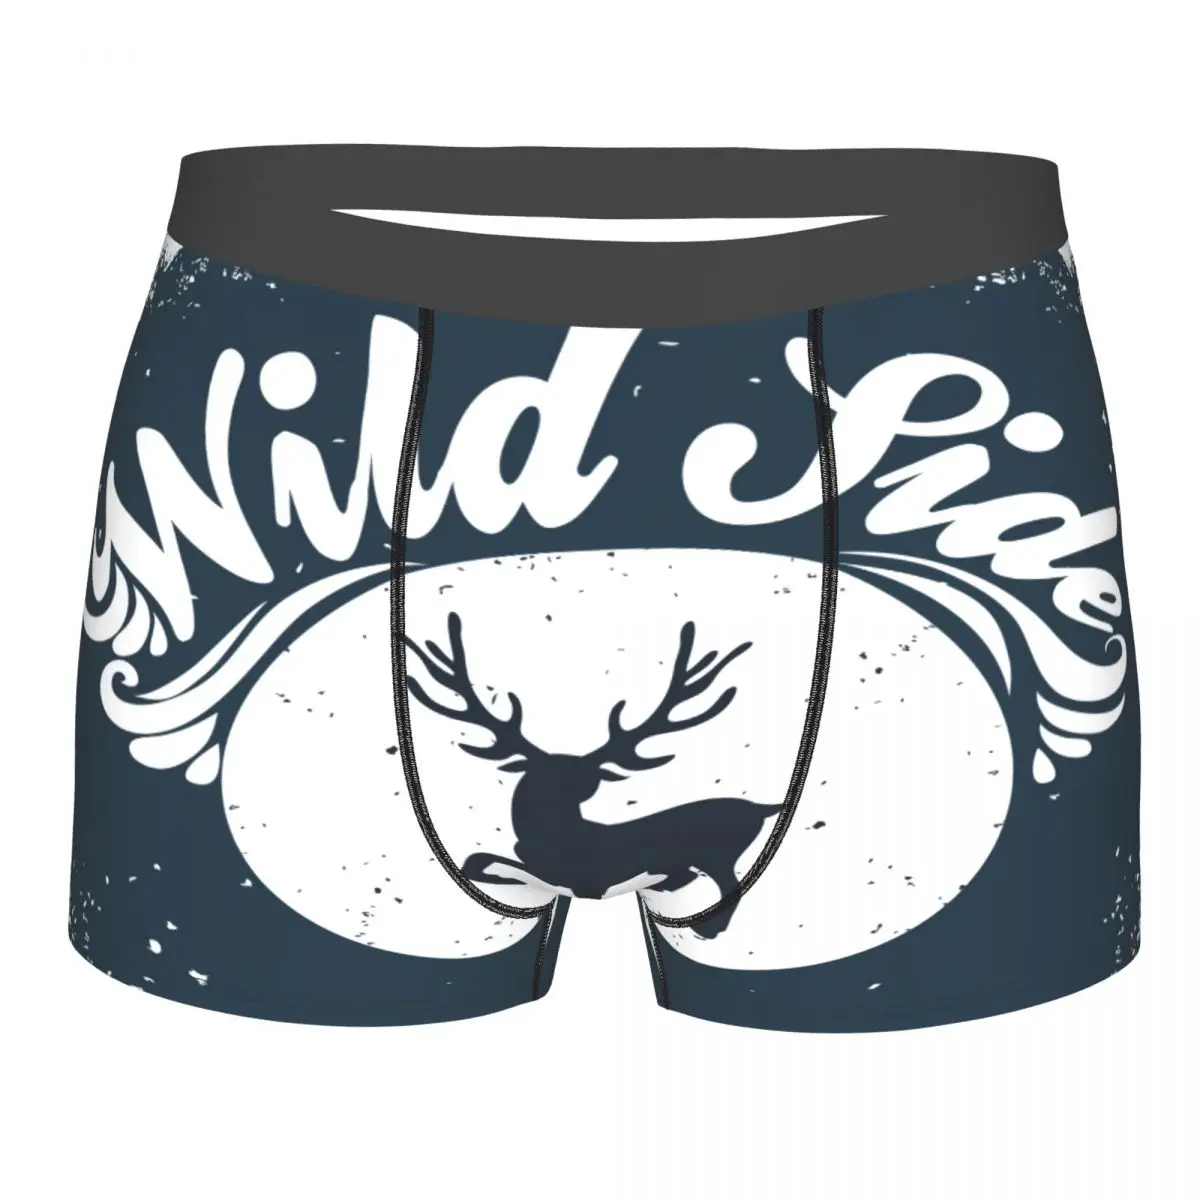 

Boxer Men Shorts Underwear Male Inspirational And Motivational Hipster Deer Boxershorts Panties Underpants Man Sexy